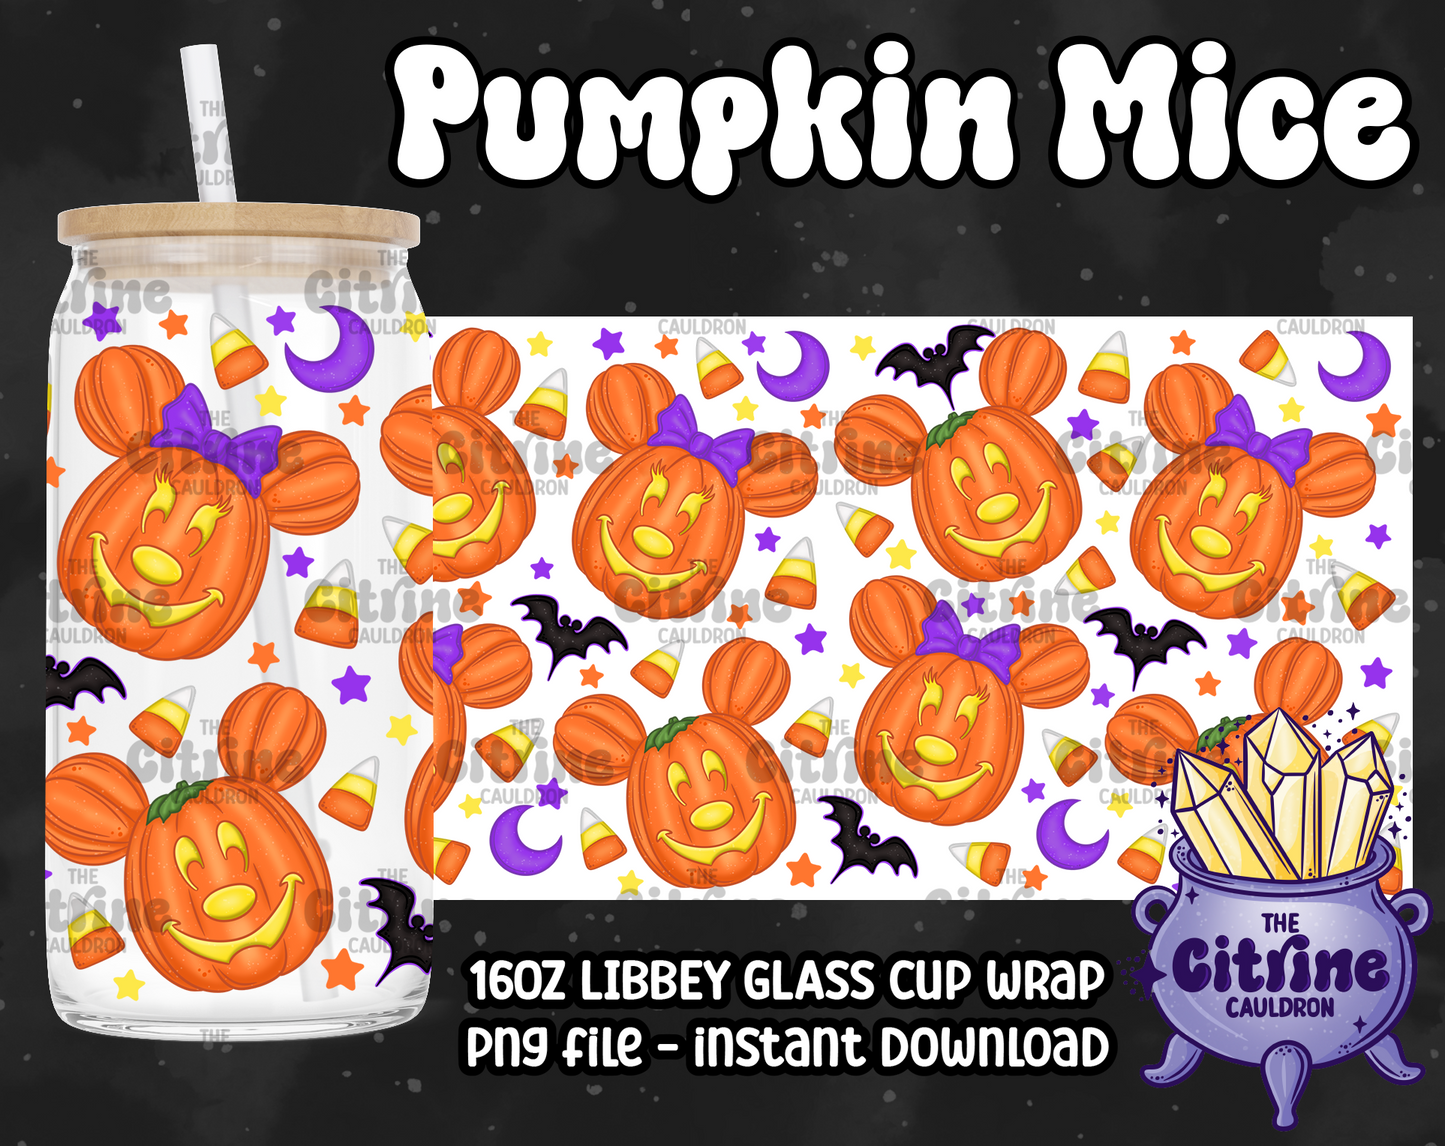 Pumpkin Mice - PNG Wrap for Libbey 16oz Glass Can